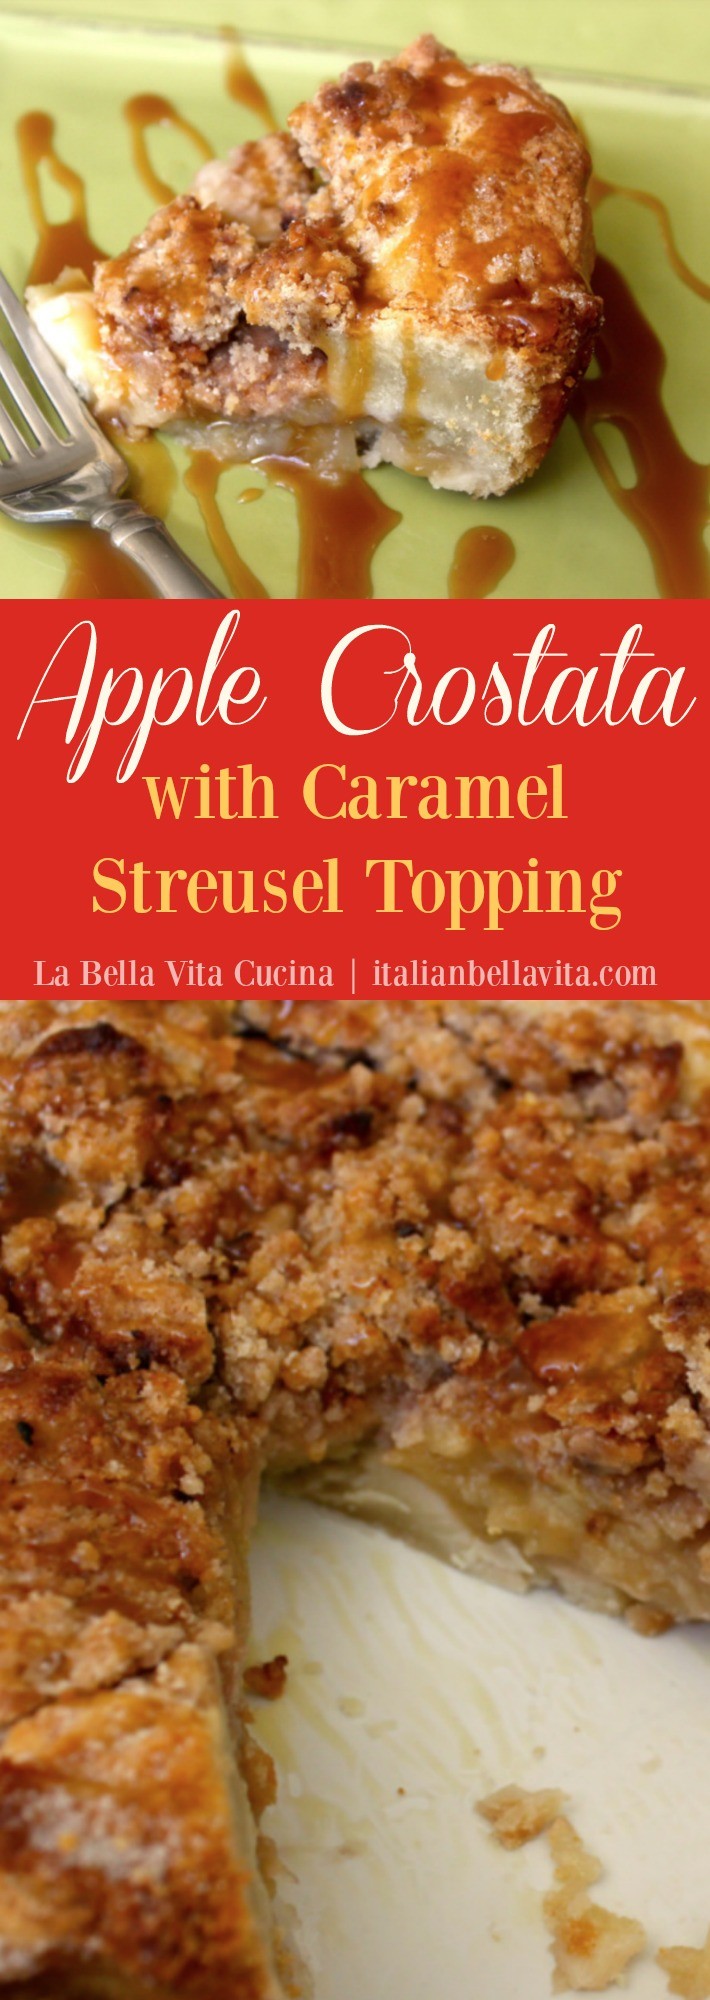 Rustic Apple Crostata with Caramel Streusel Topping